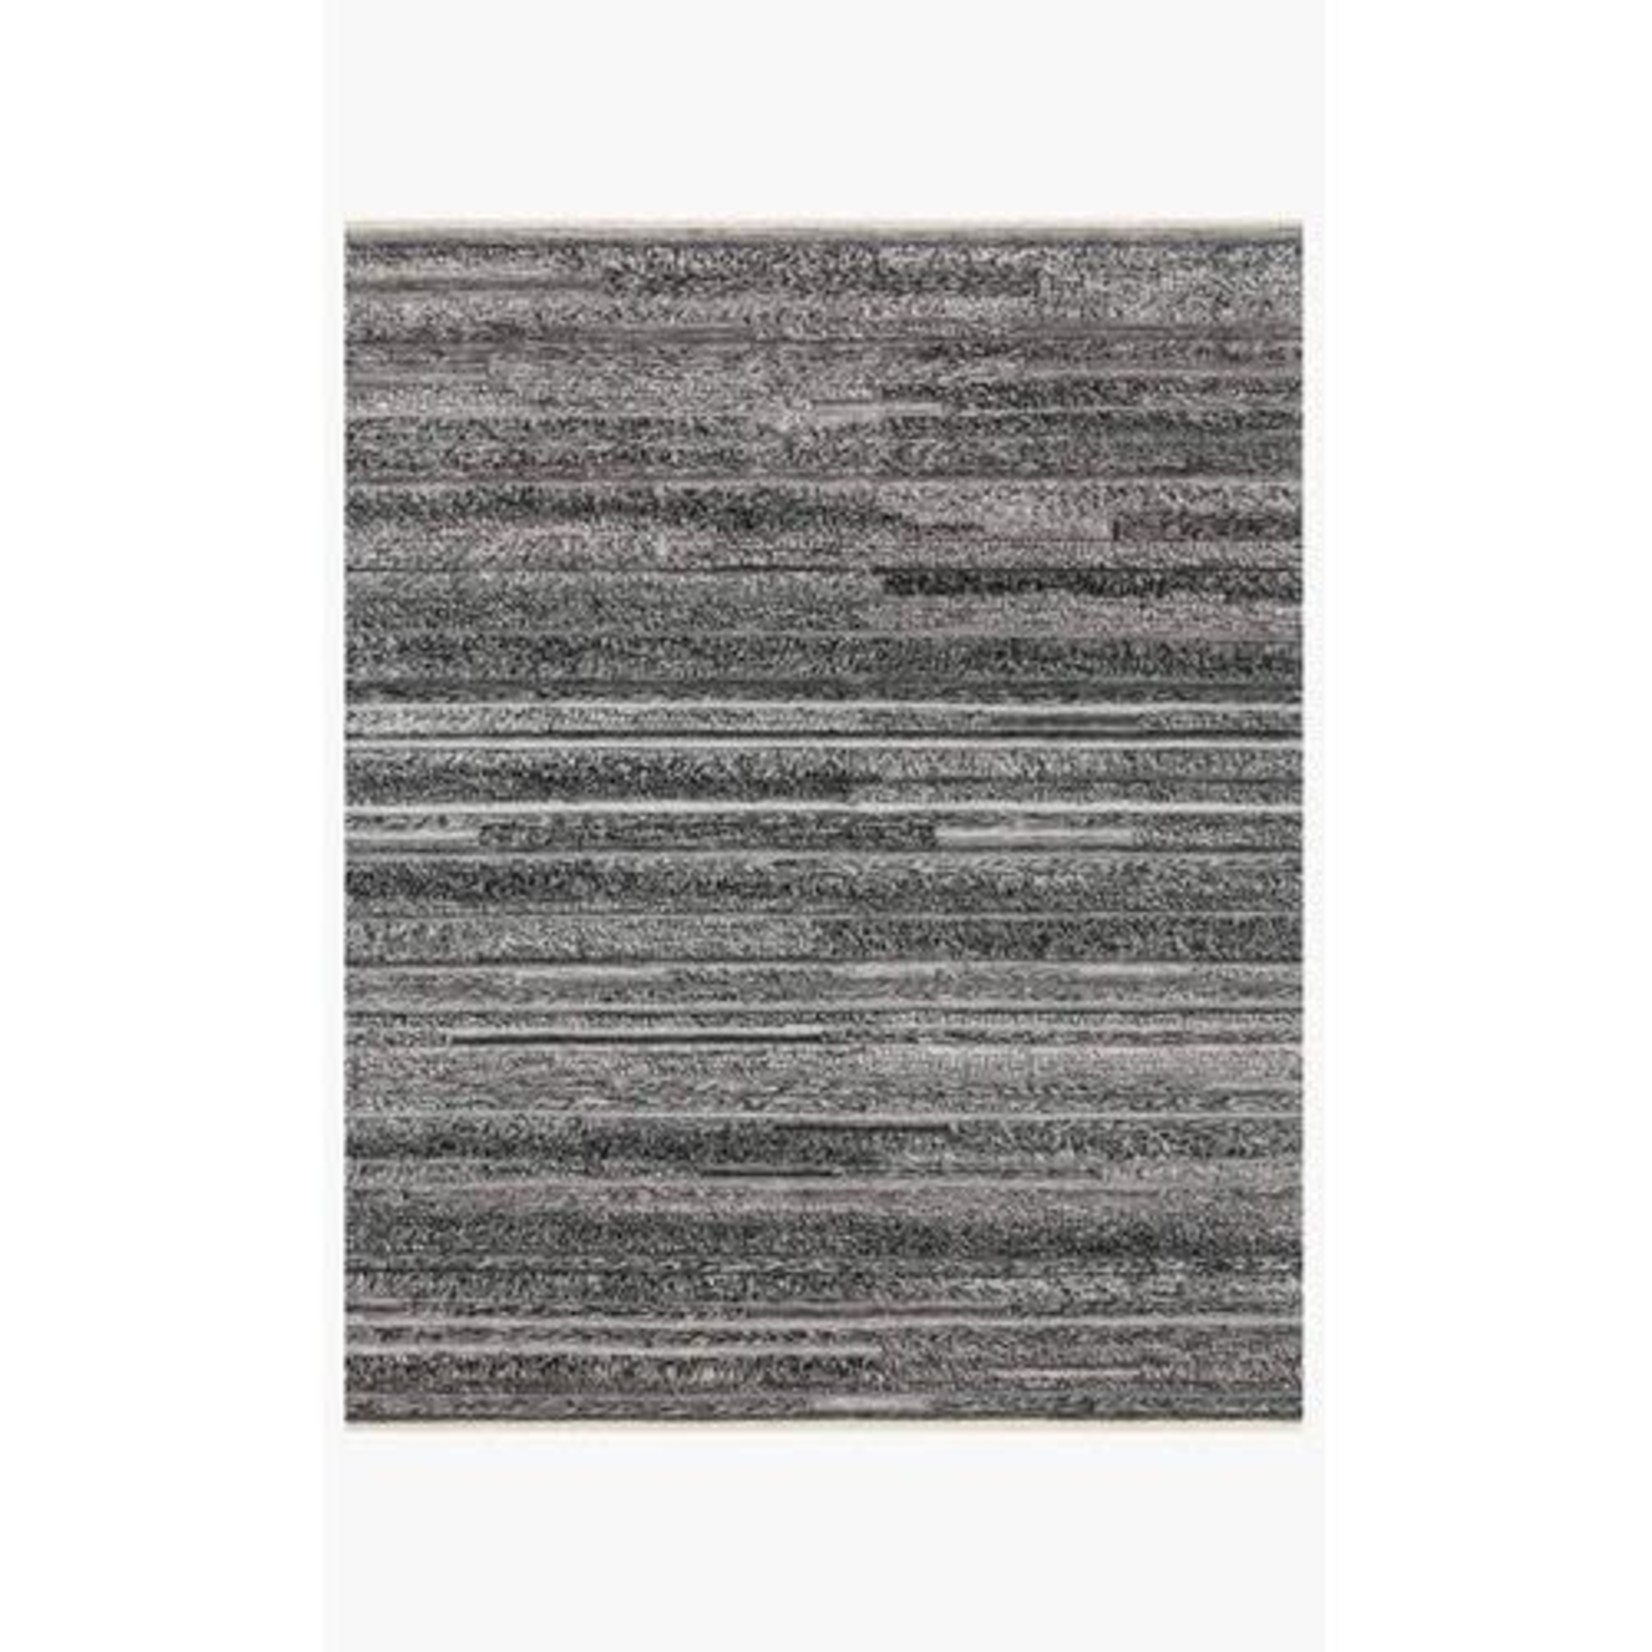 LOLOI RODEO RUG-CHARCOAL  5'6" x 8'6"